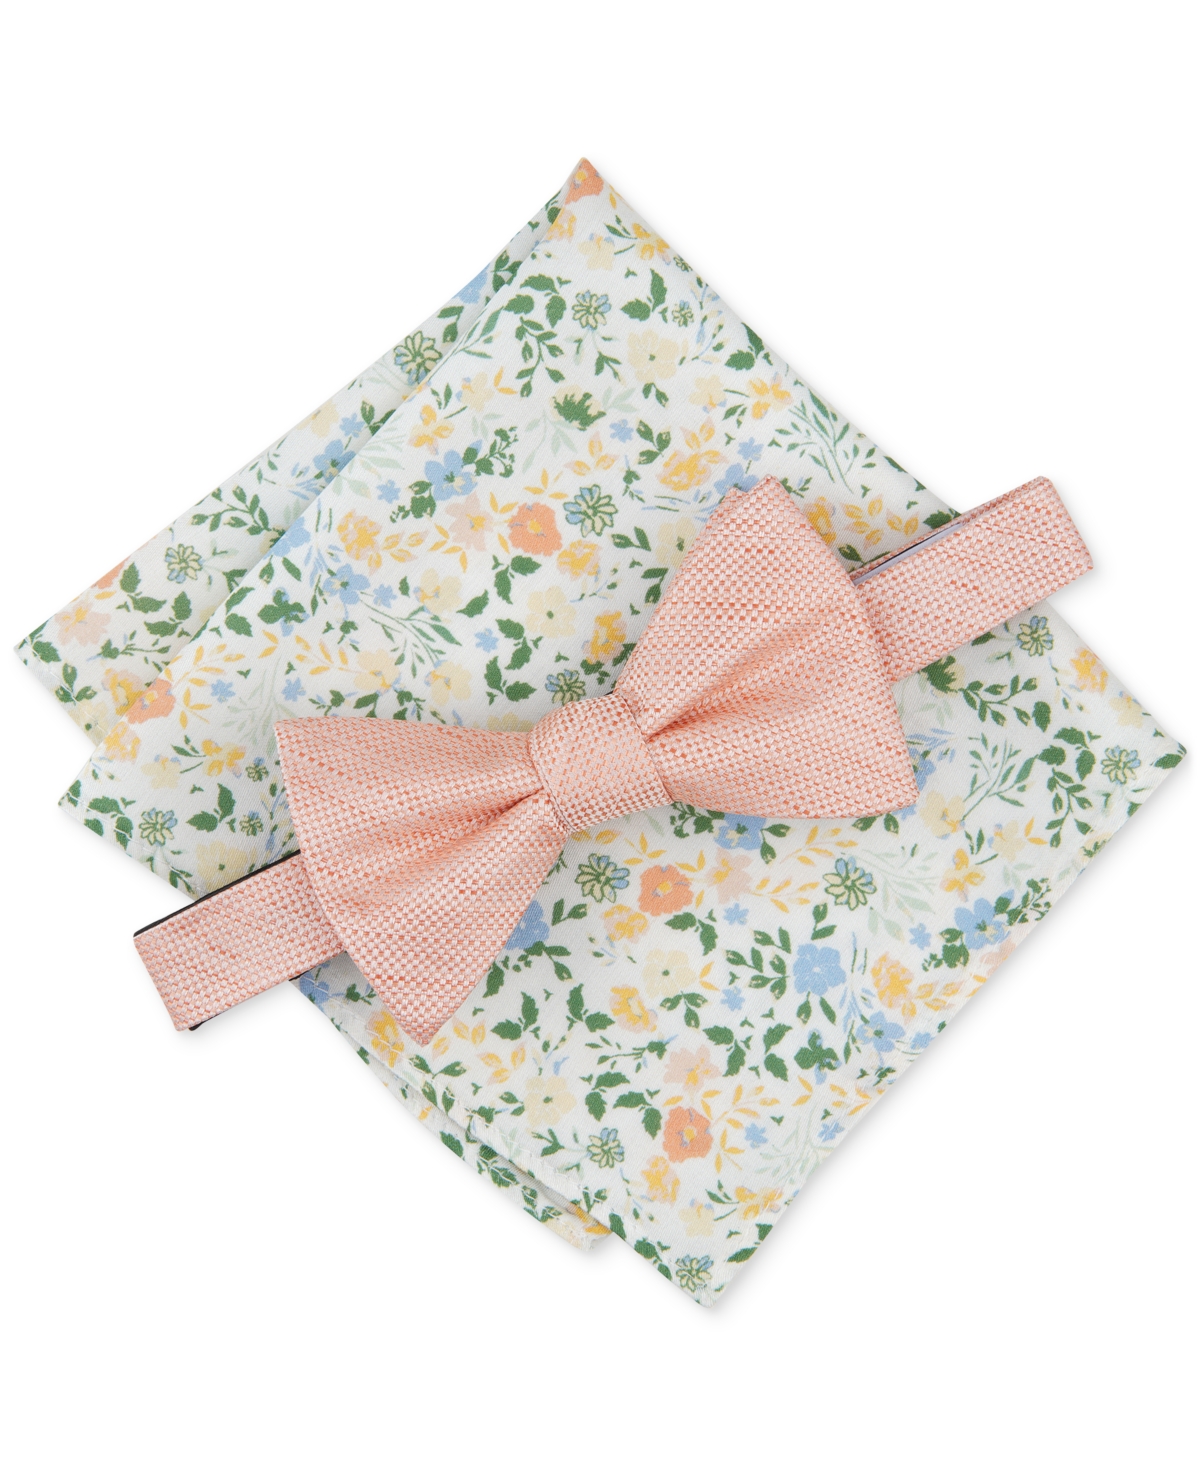 Men's Wren Textured Bow Tie & Floral Pocket Square Set, Created for Macy's - Melon